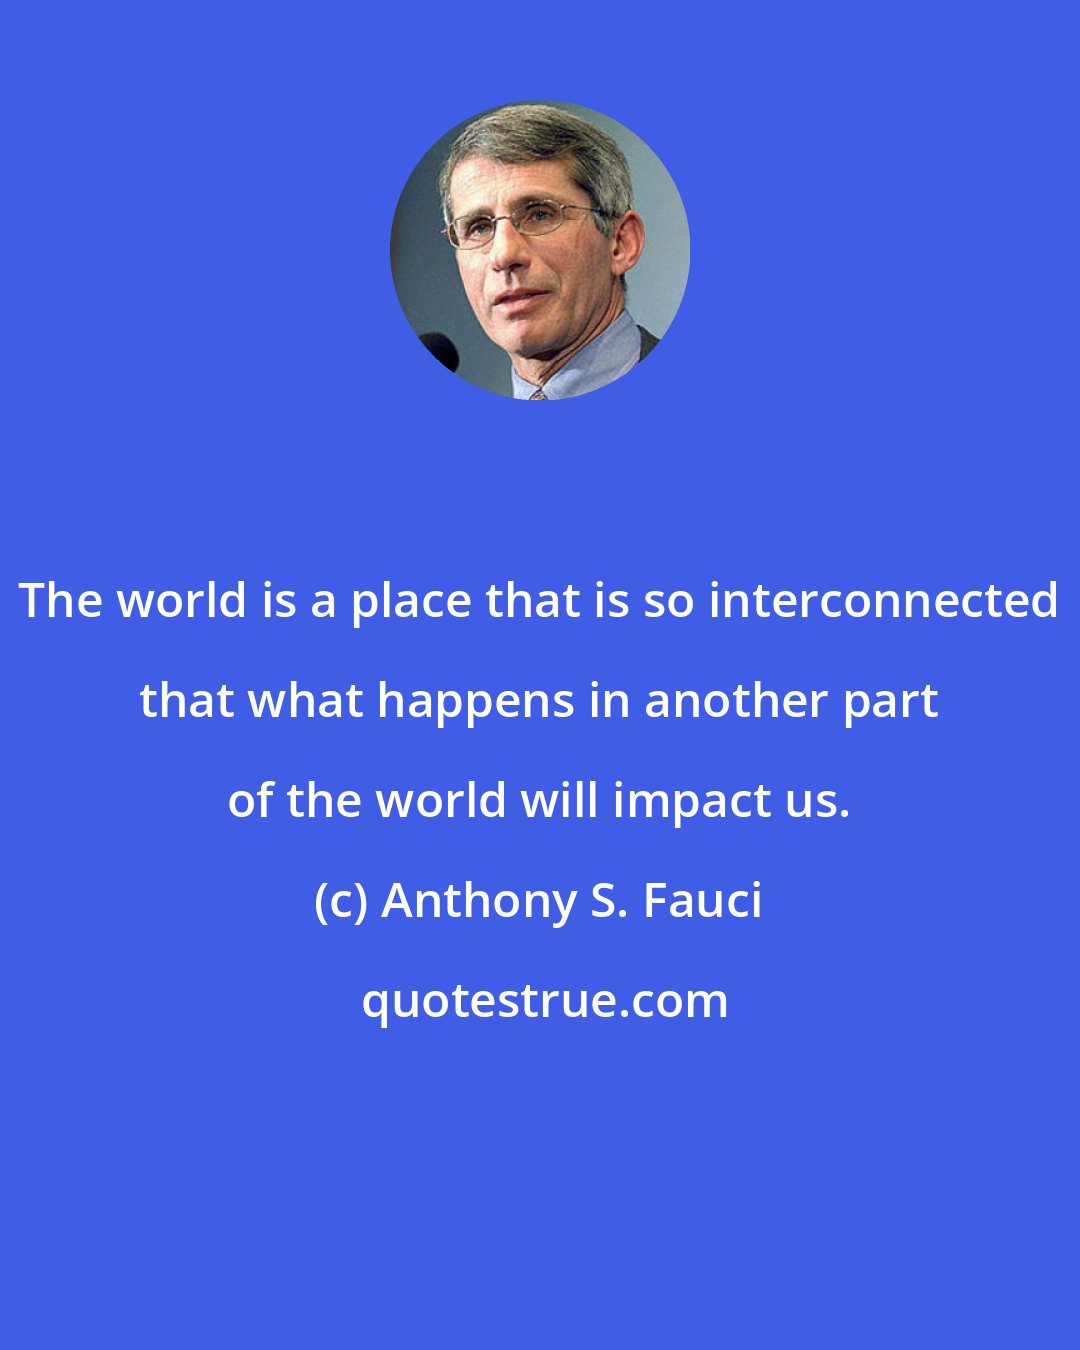 Anthony S. Fauci: The world is a place that is so interconnected that what happens in another part of the world will impact us.